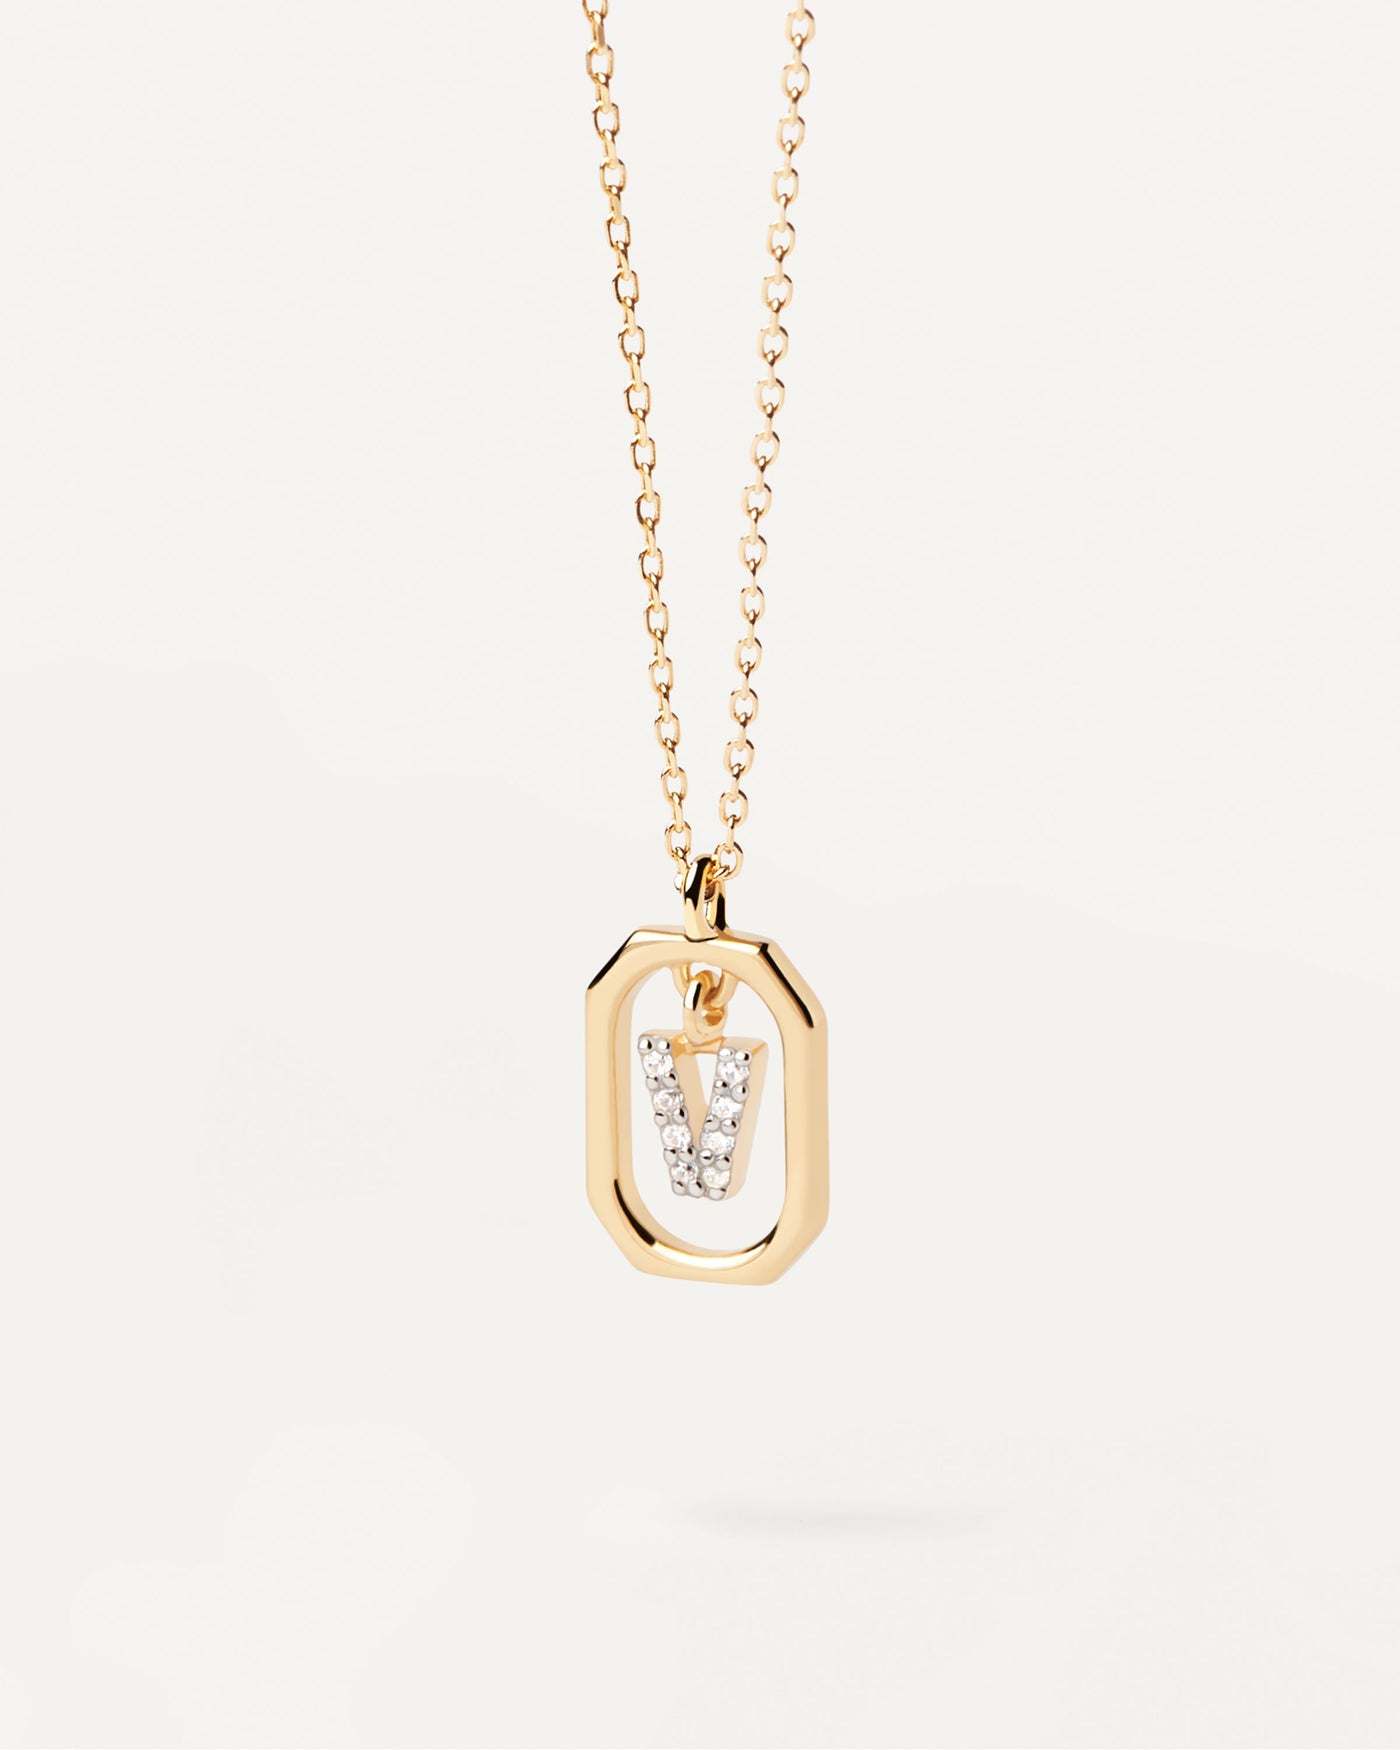 2023 Selection | Mini Letter V Necklace. Small initial V necklace in zirconia inside gold-plated silver octagonal pendant. Get the latest arrival from PDPAOLA. Place your order safely and get this Best Seller. Free Shipping.